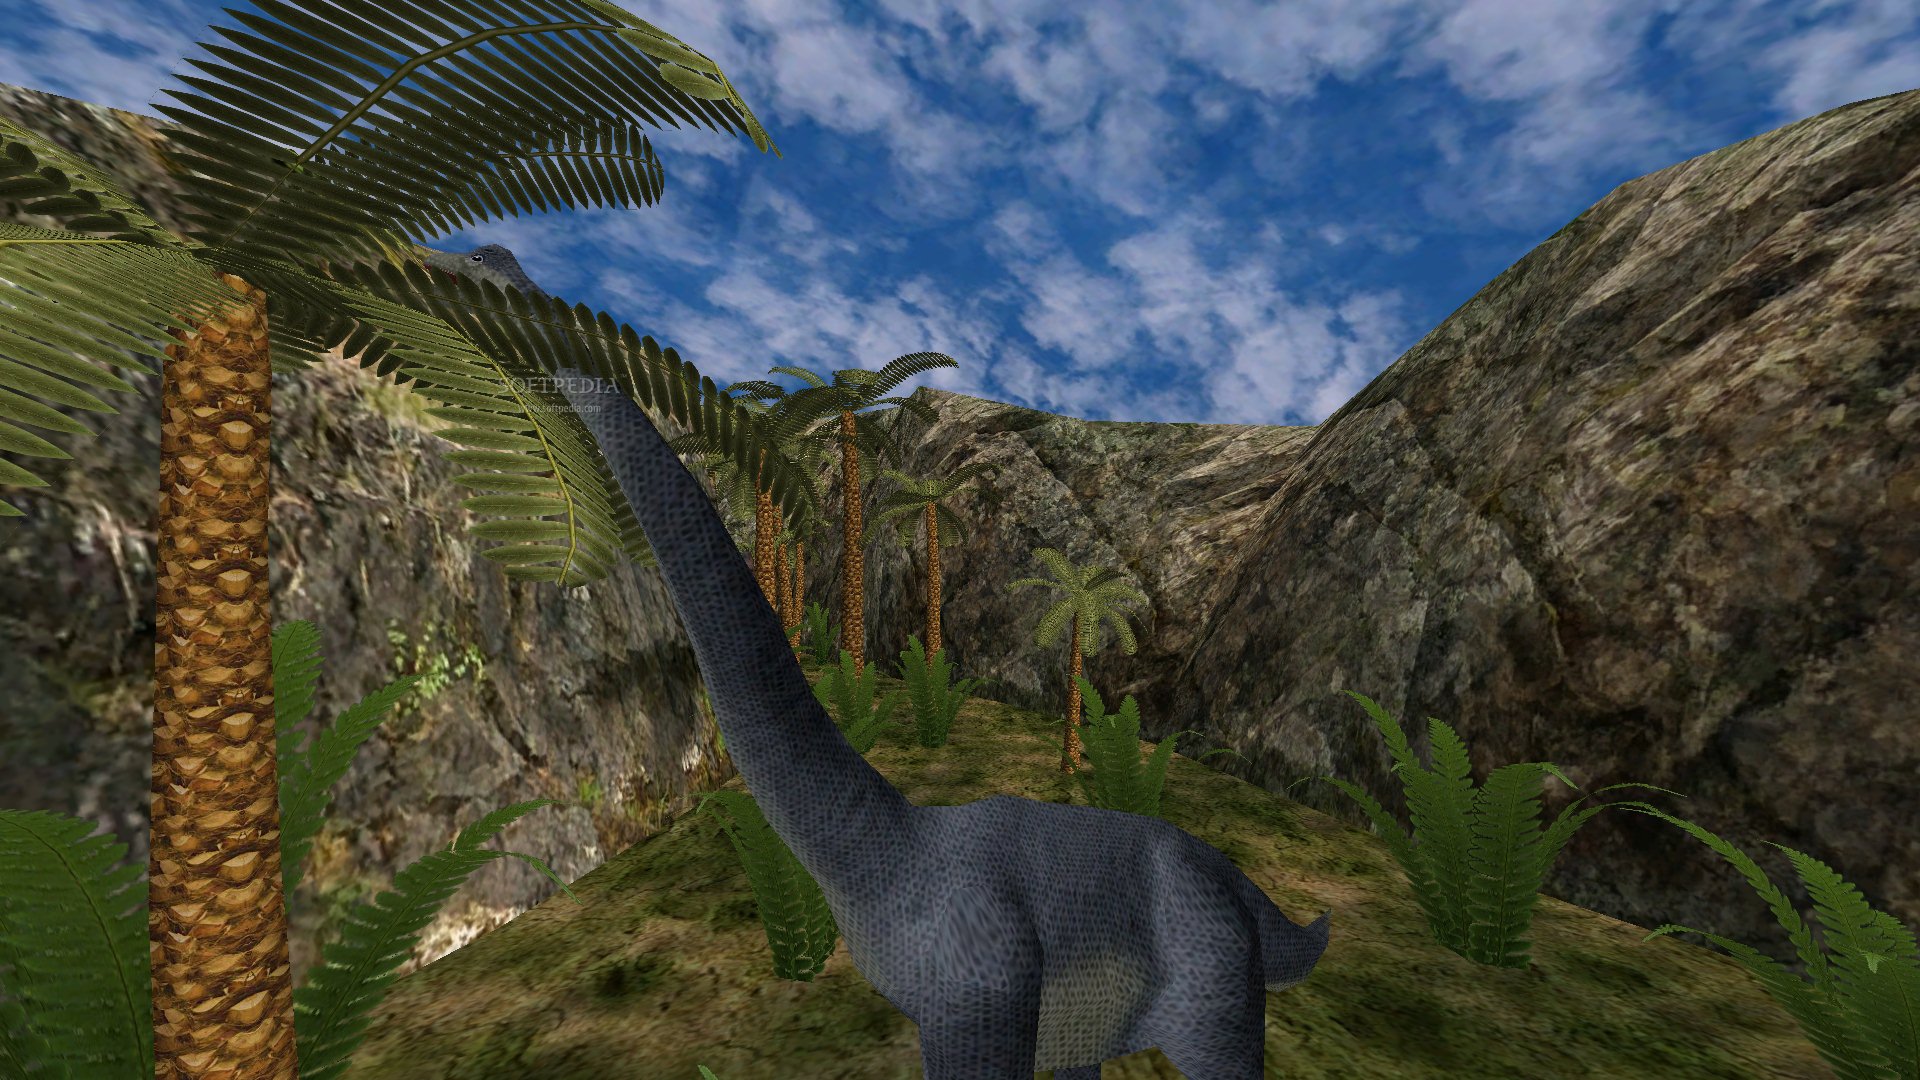 Age Of Dinosaurs 3d Screenshot This Screensaver Will Provide A